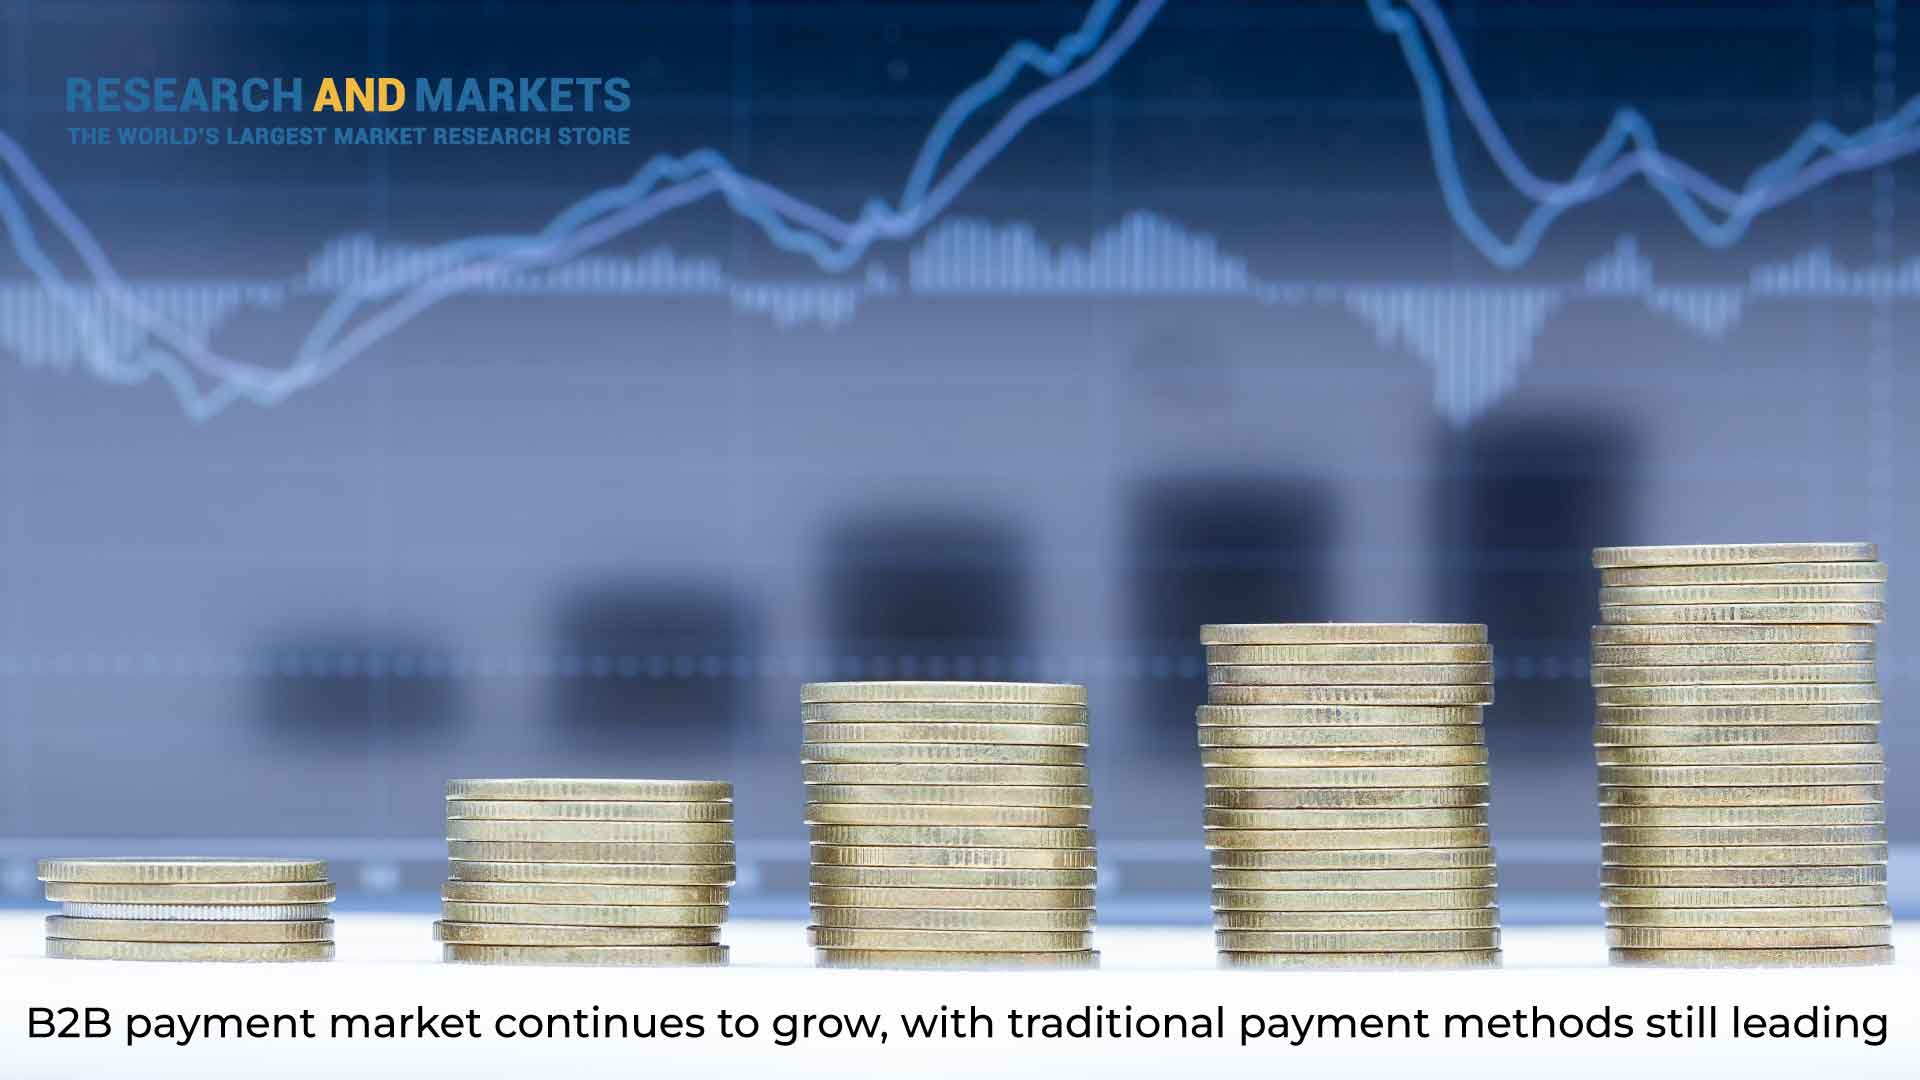 Global B2B Payment Market Trends Report 2022: B2B Payment Market Continues to Grow, with Traditional Payment Methods Still Leading